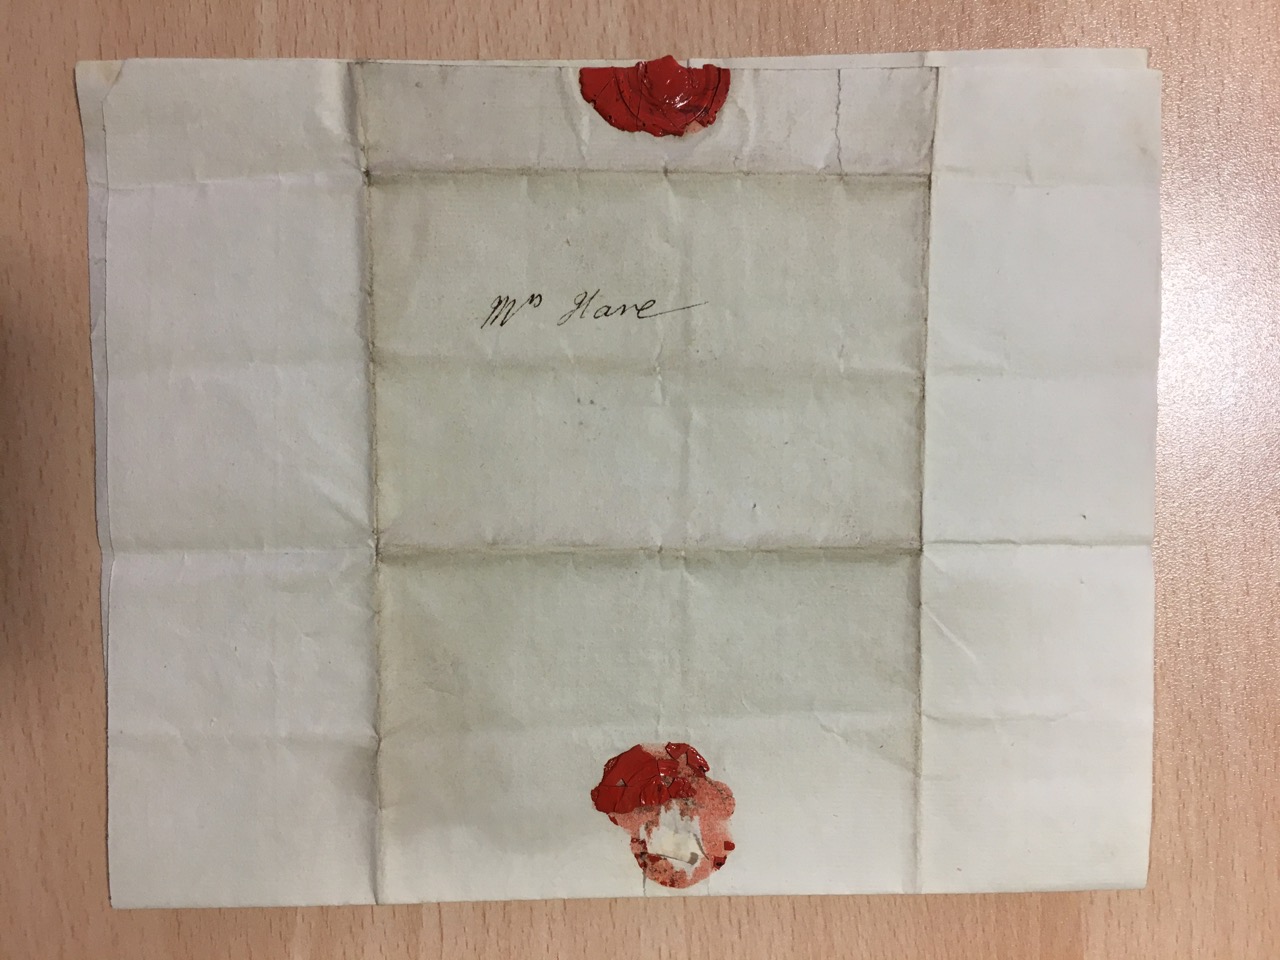 Image #3 of letter: Elizabeth Hare to Ann Hare, undated